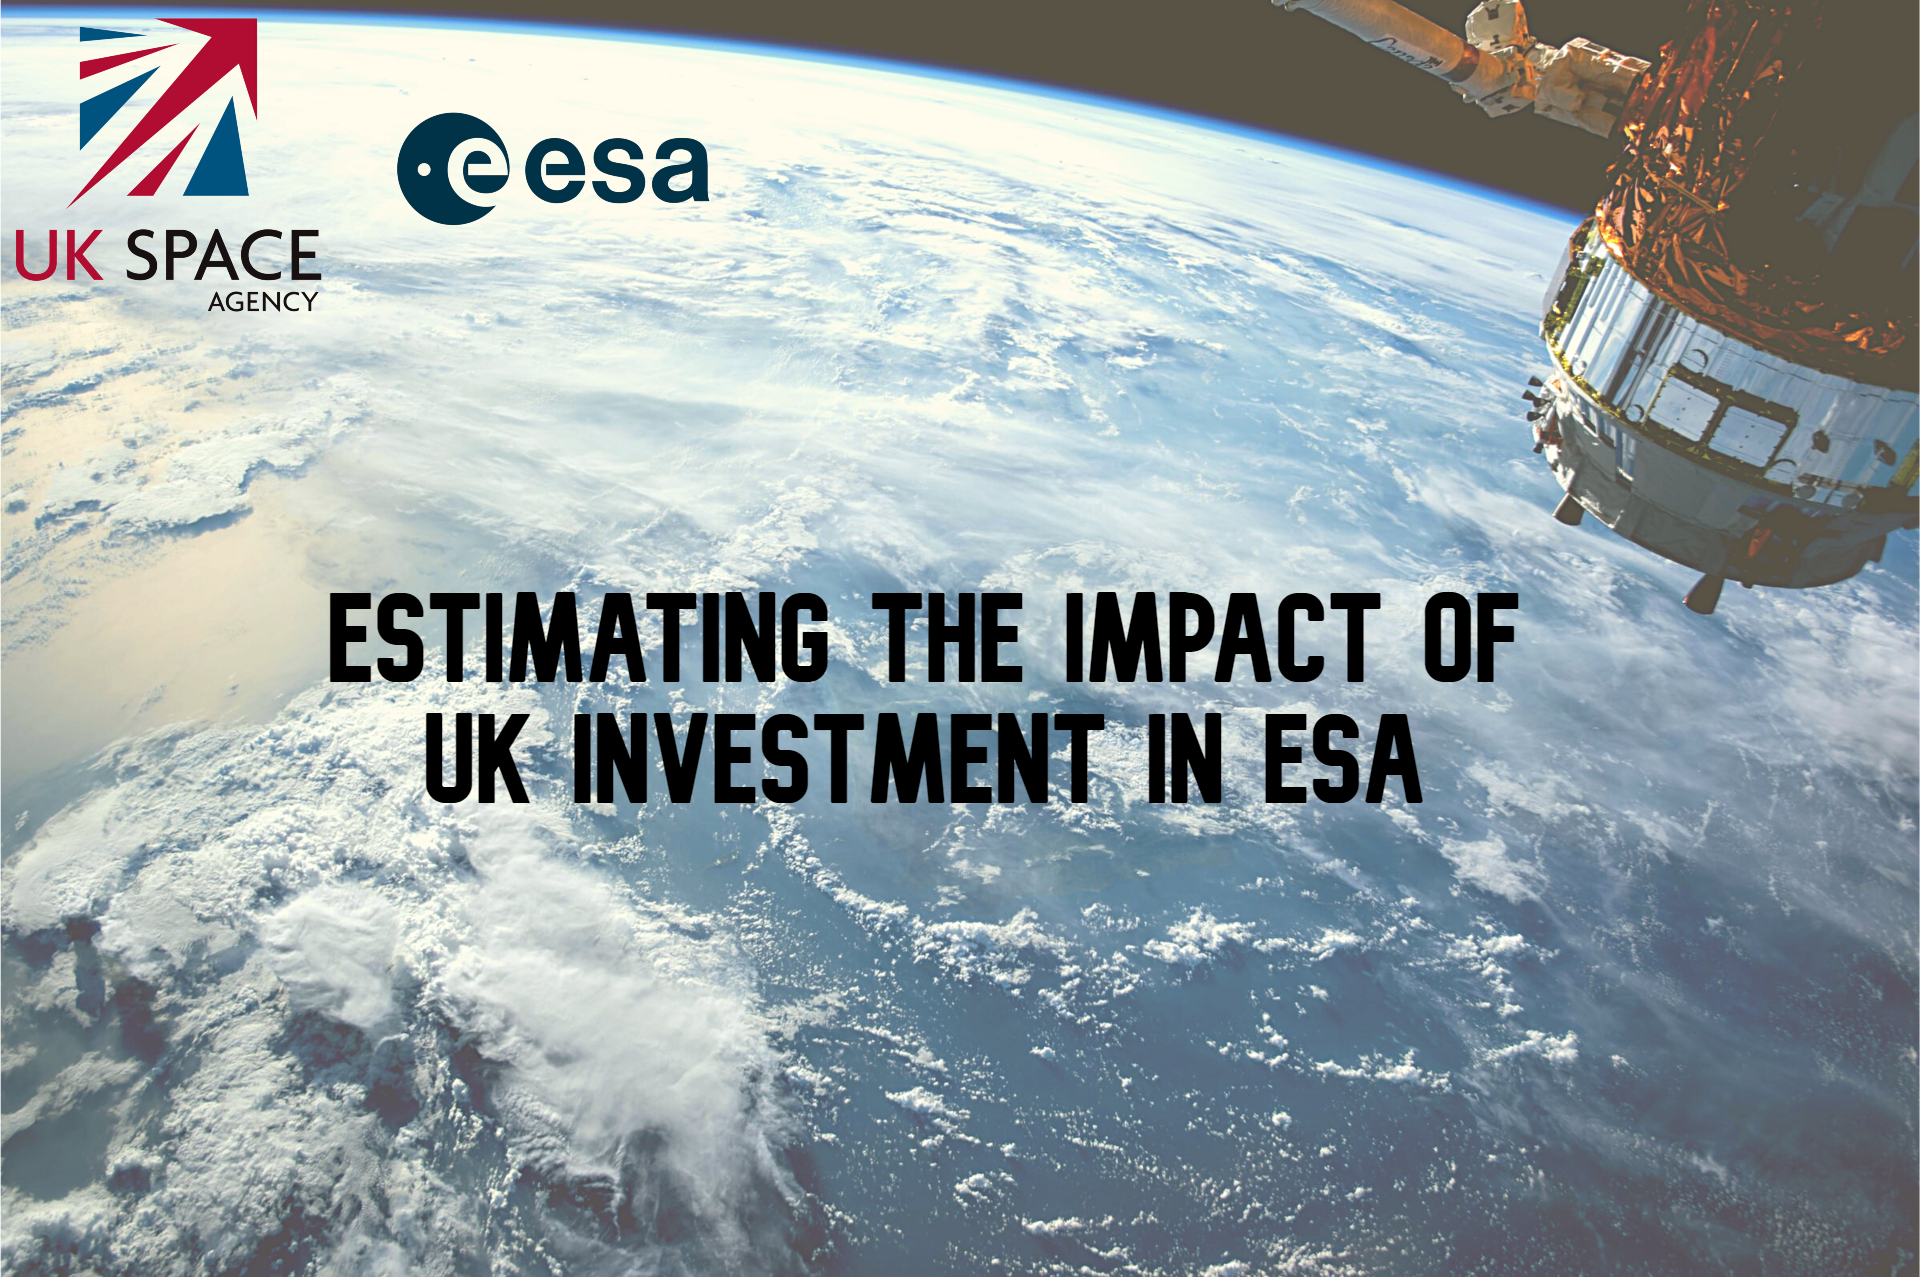 Estimating the Impact of UK Investment in ESA – Is It a Win-Win?